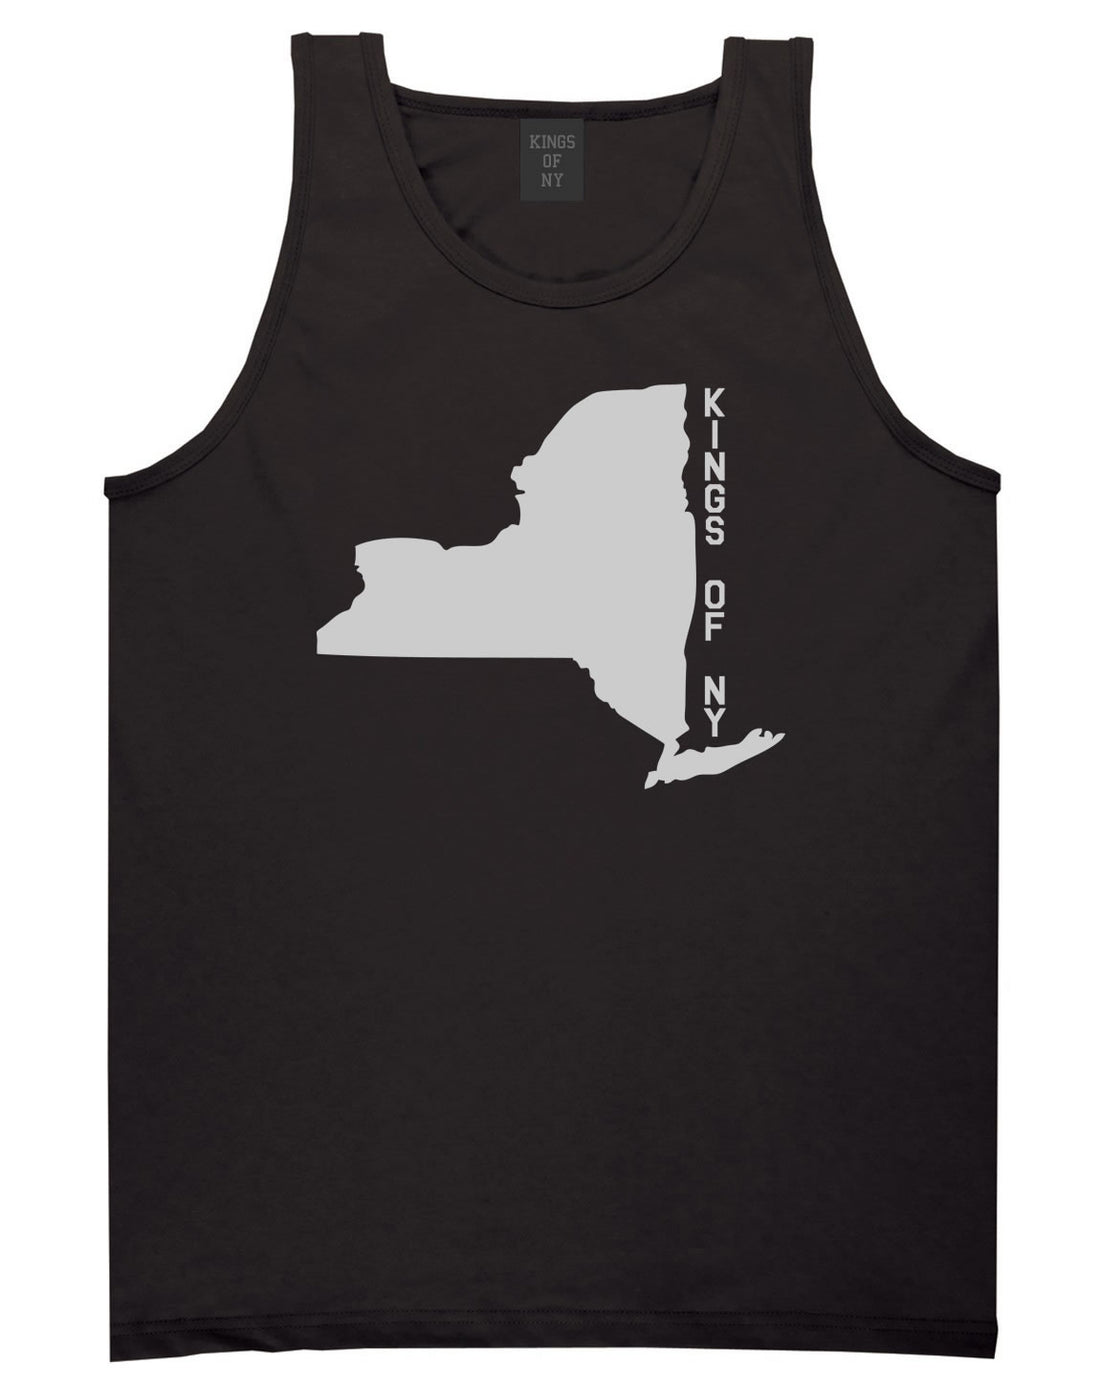 New York State Shape Tank Top in Black By Kings Of NY